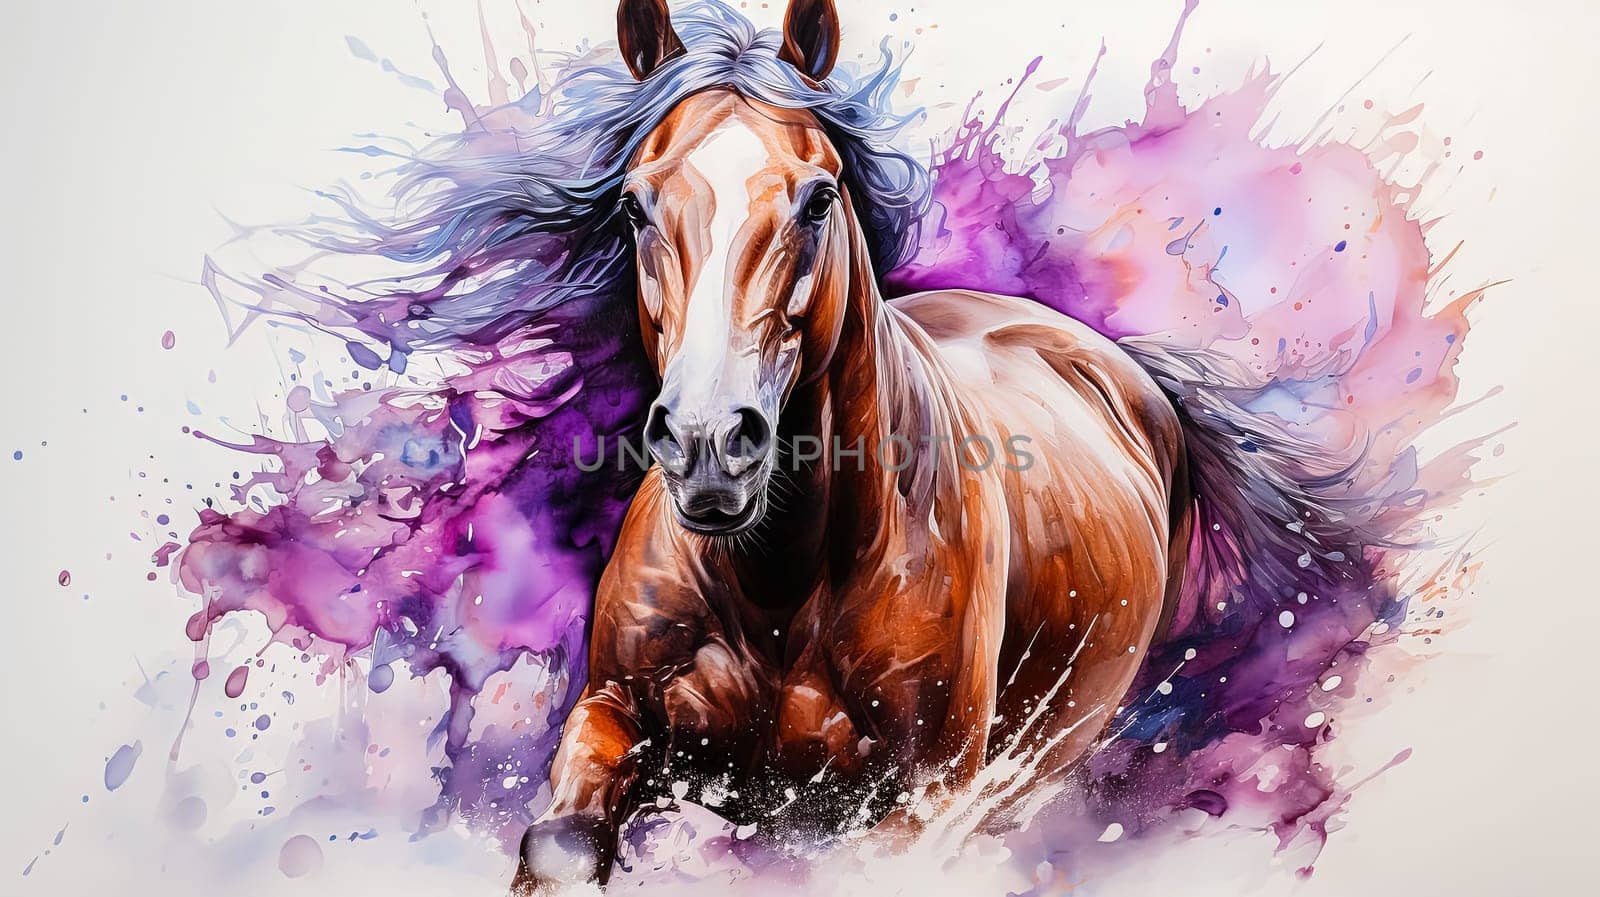 A stunning watercolor depiction of a horse captured in dynamic splashes of color by Alla_Morozova93